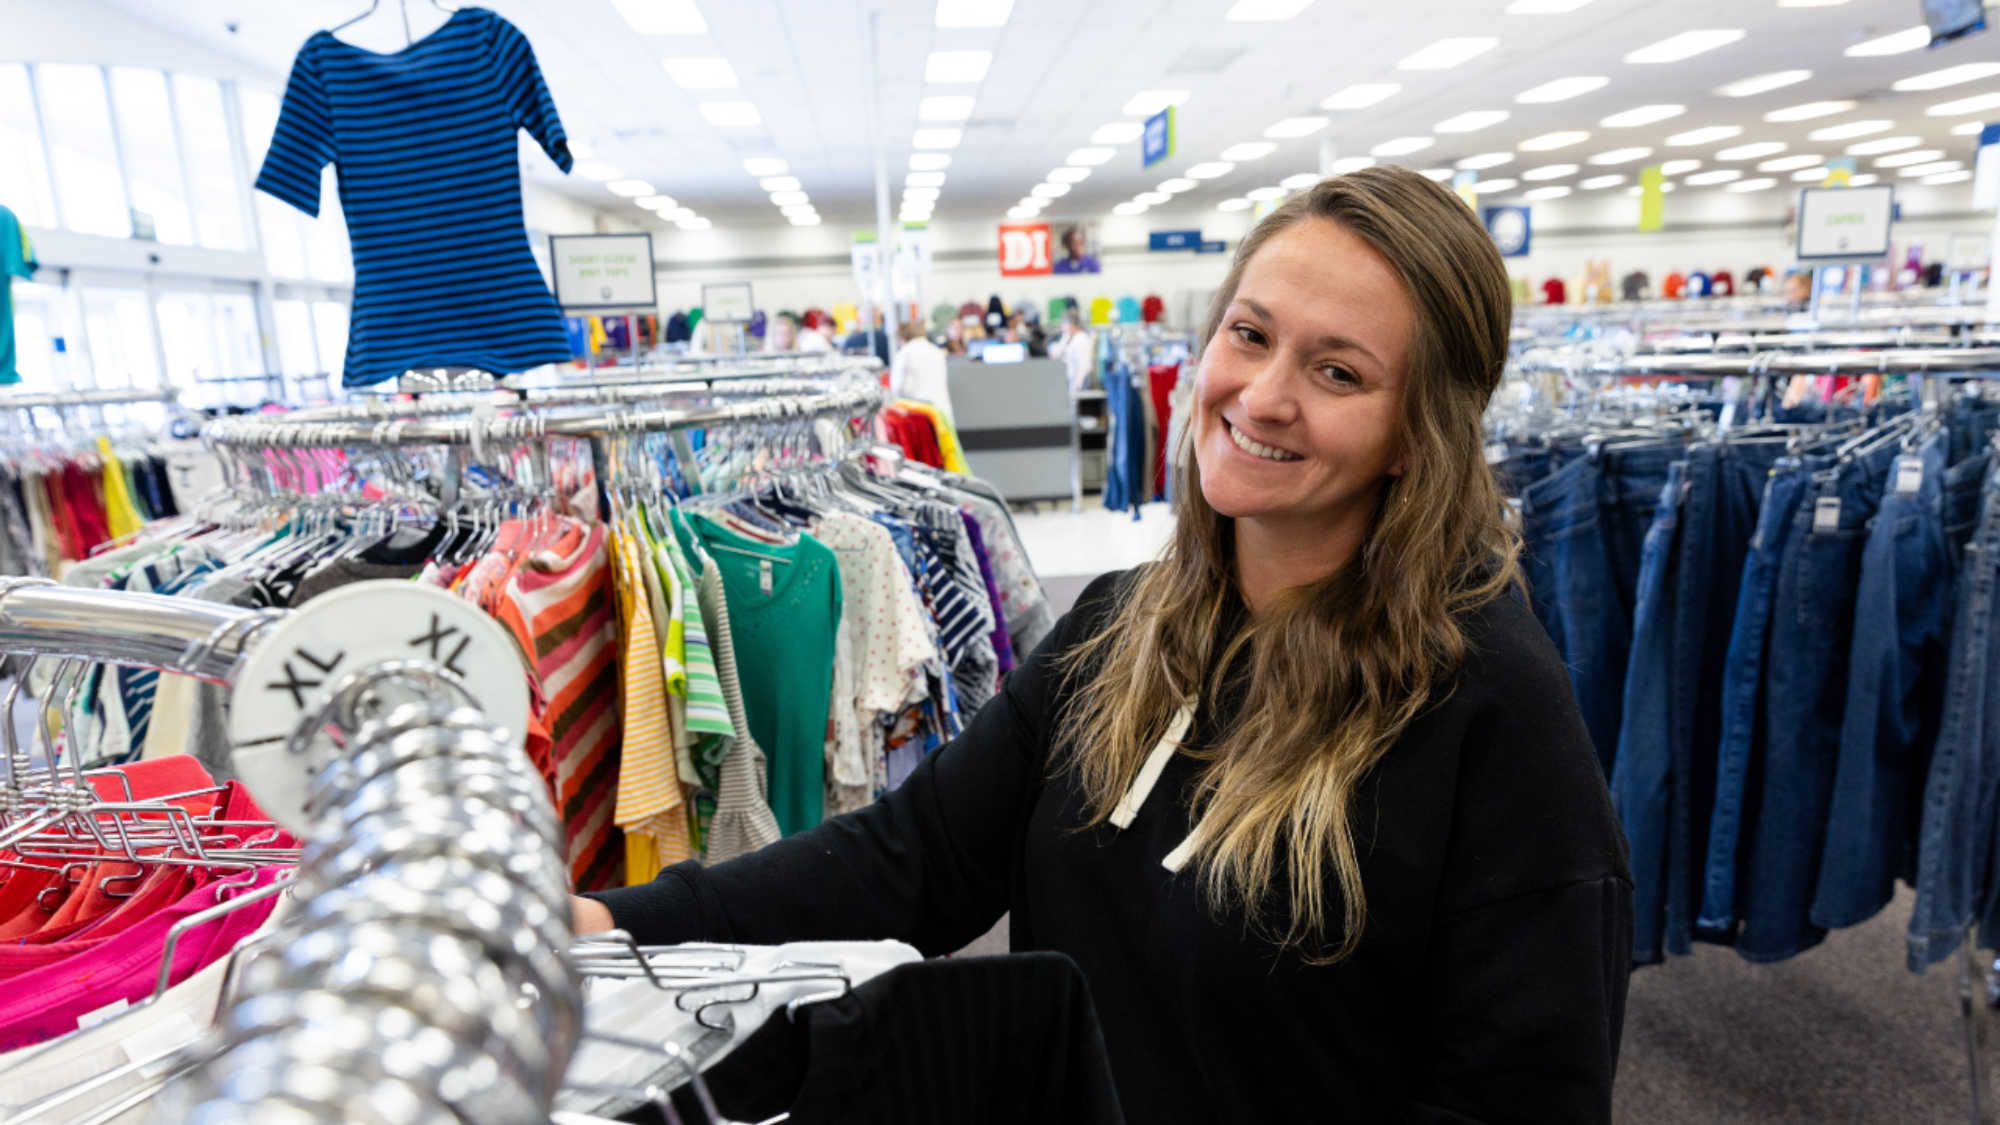 A woman smiles at the camera as she shops for children's clothing at her local Deseret Industries store.